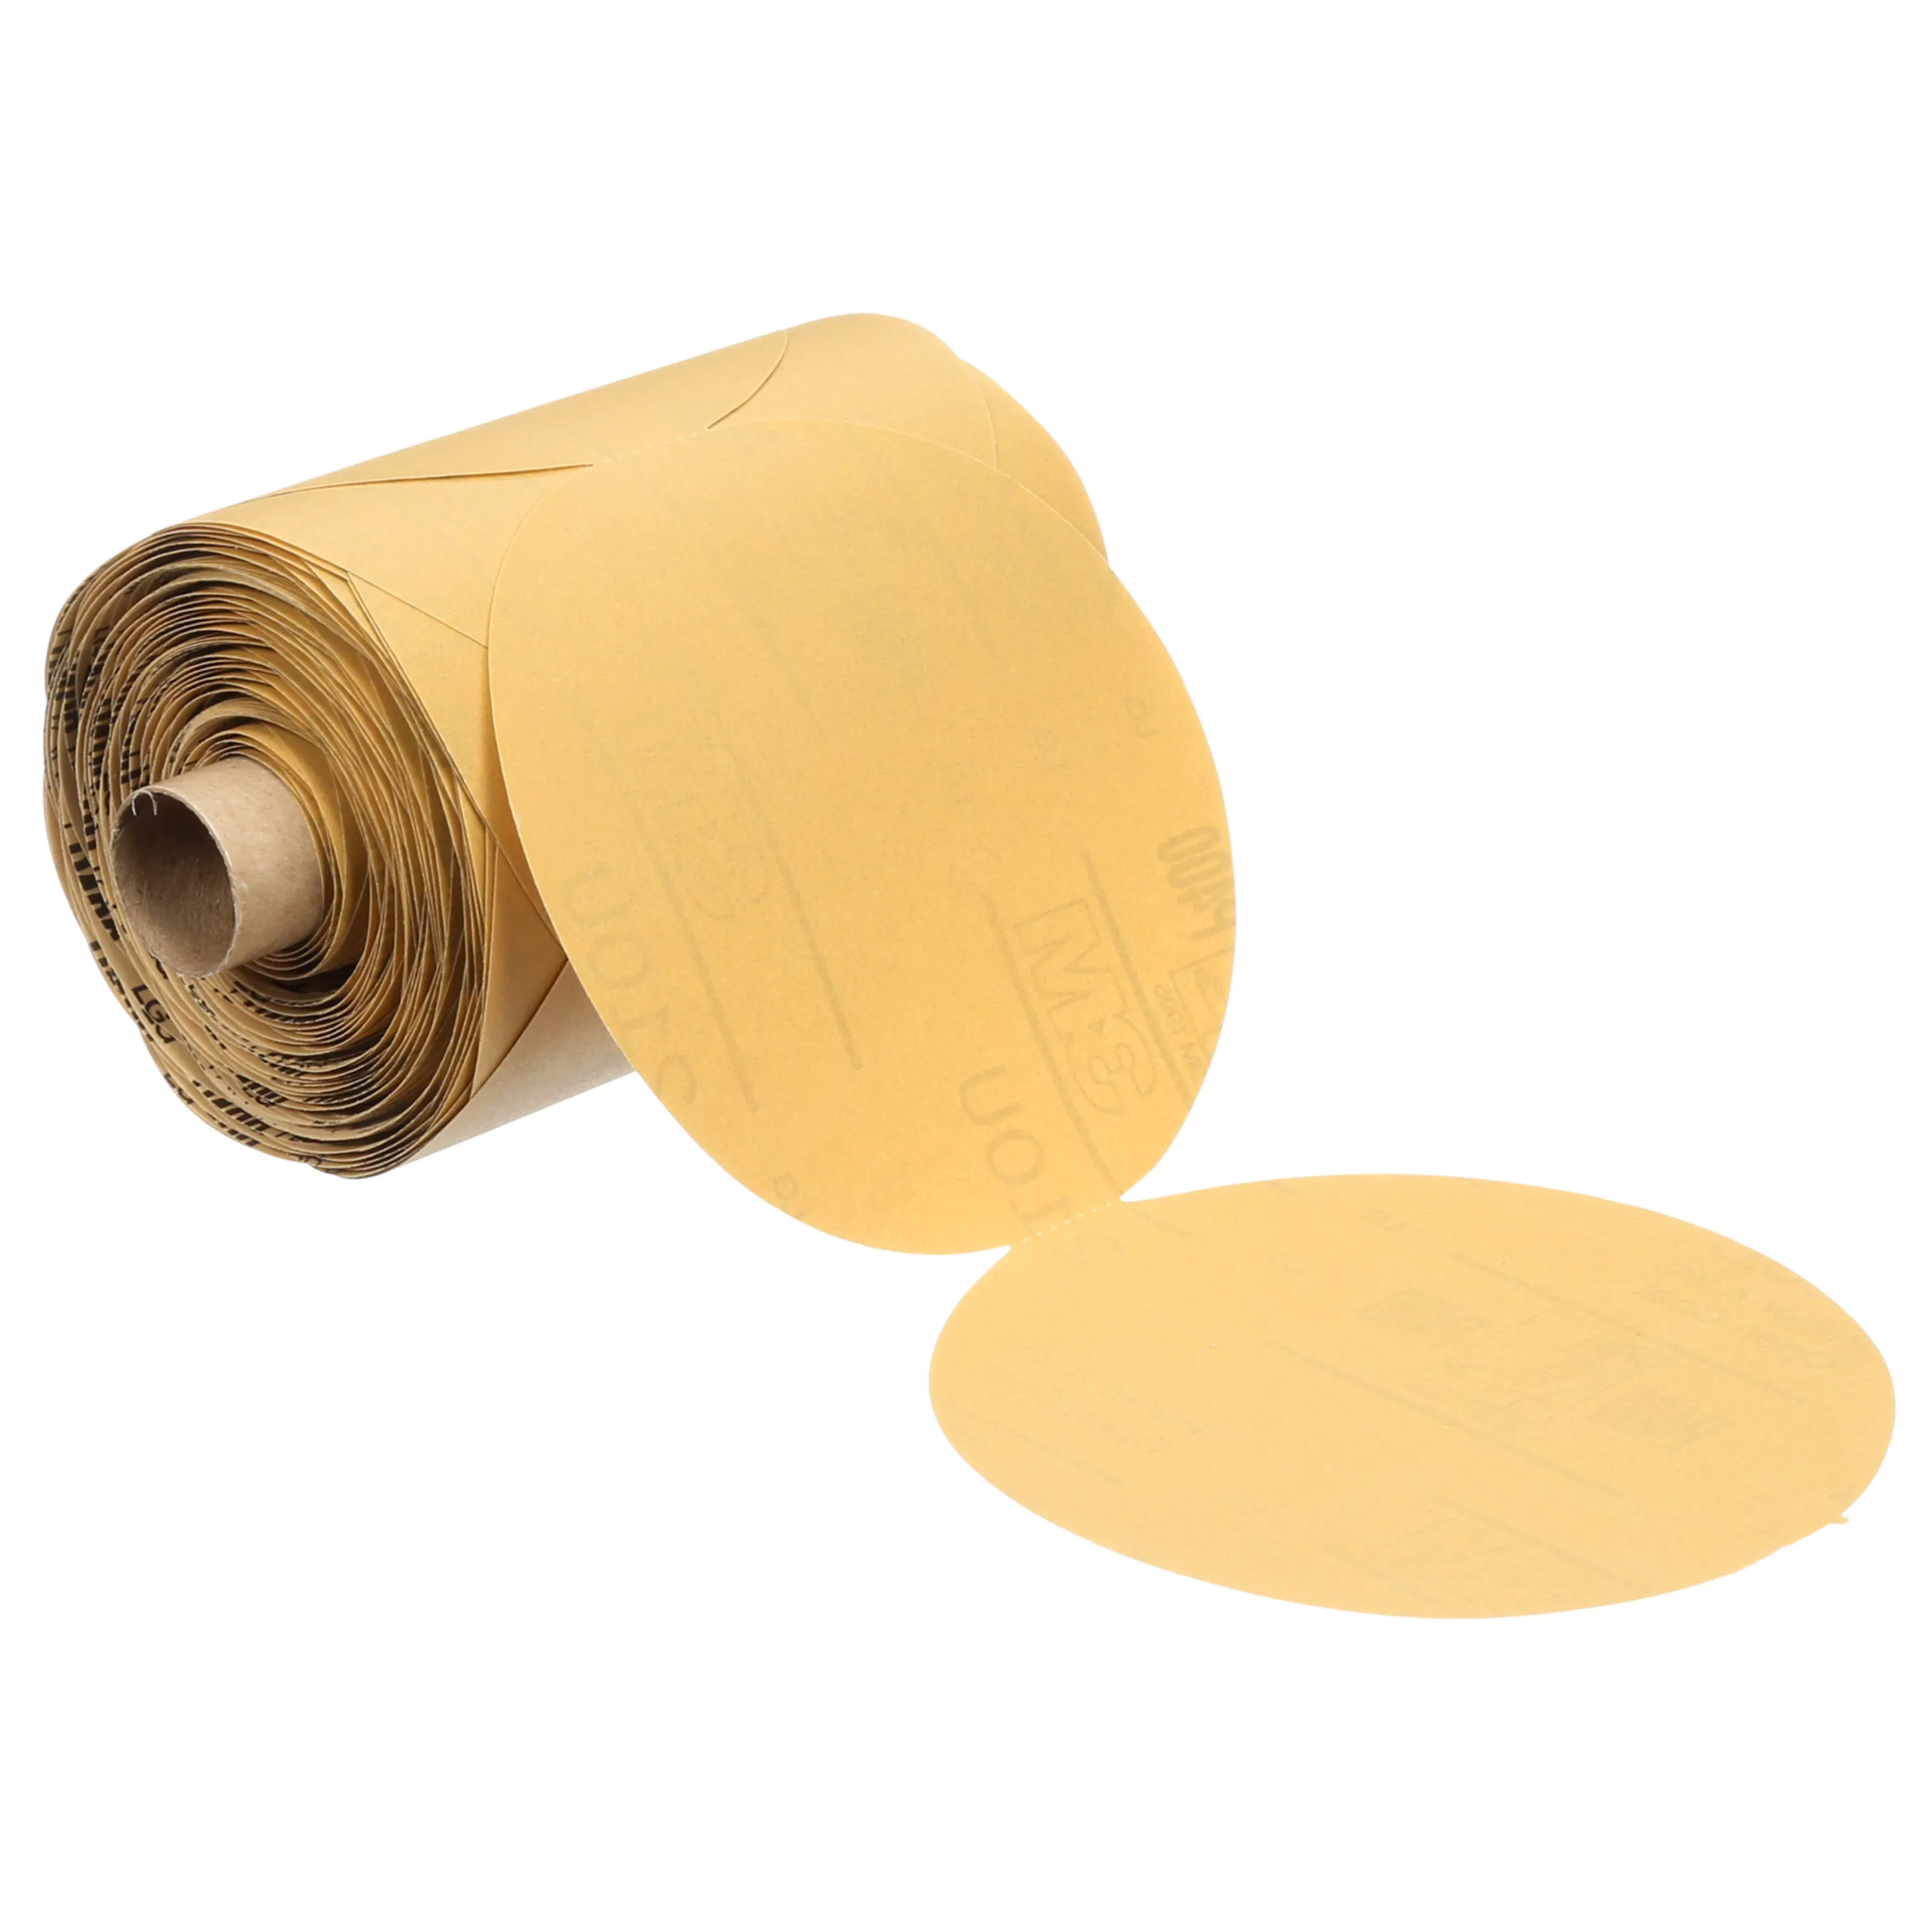 3M™ Stikit™ Paper Disc Roll 210U, P400 A-weight, 5 in x NH, Linered, Die 500X, 250 Discs/Roll, 4 Rolls/Case